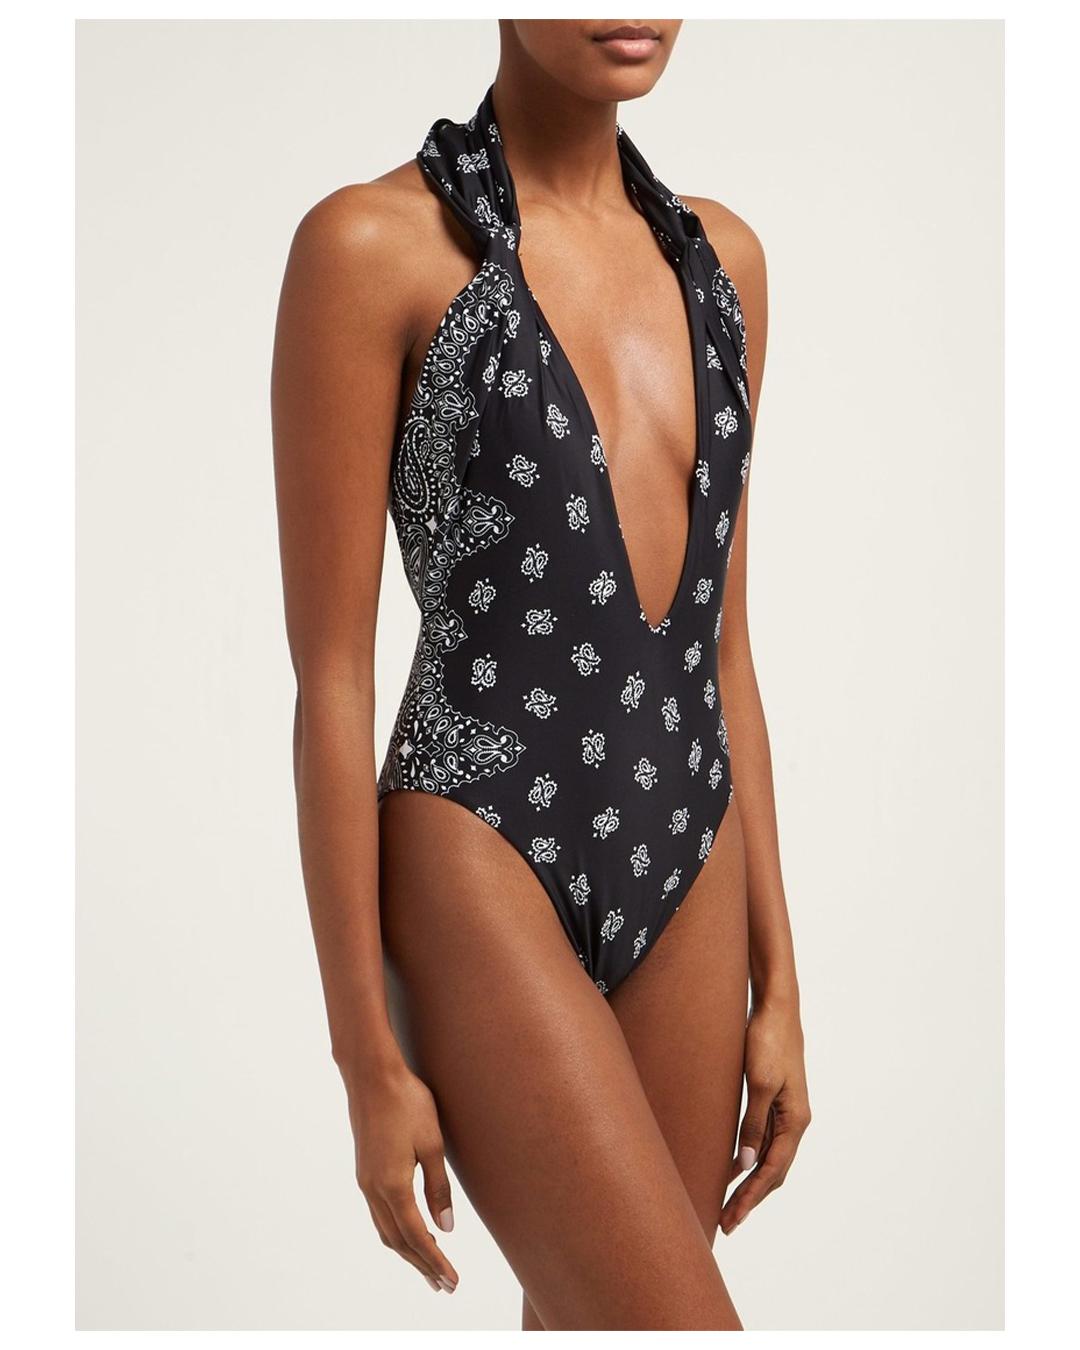 LOVE LALI Vintage

Saint Laurent bandana print black and white one piece swimsuit
Halter neck - ties at he back of the neck
Can be worn two ways, with a low plunging neckline or with the straps crossed over at the front creating a key hole